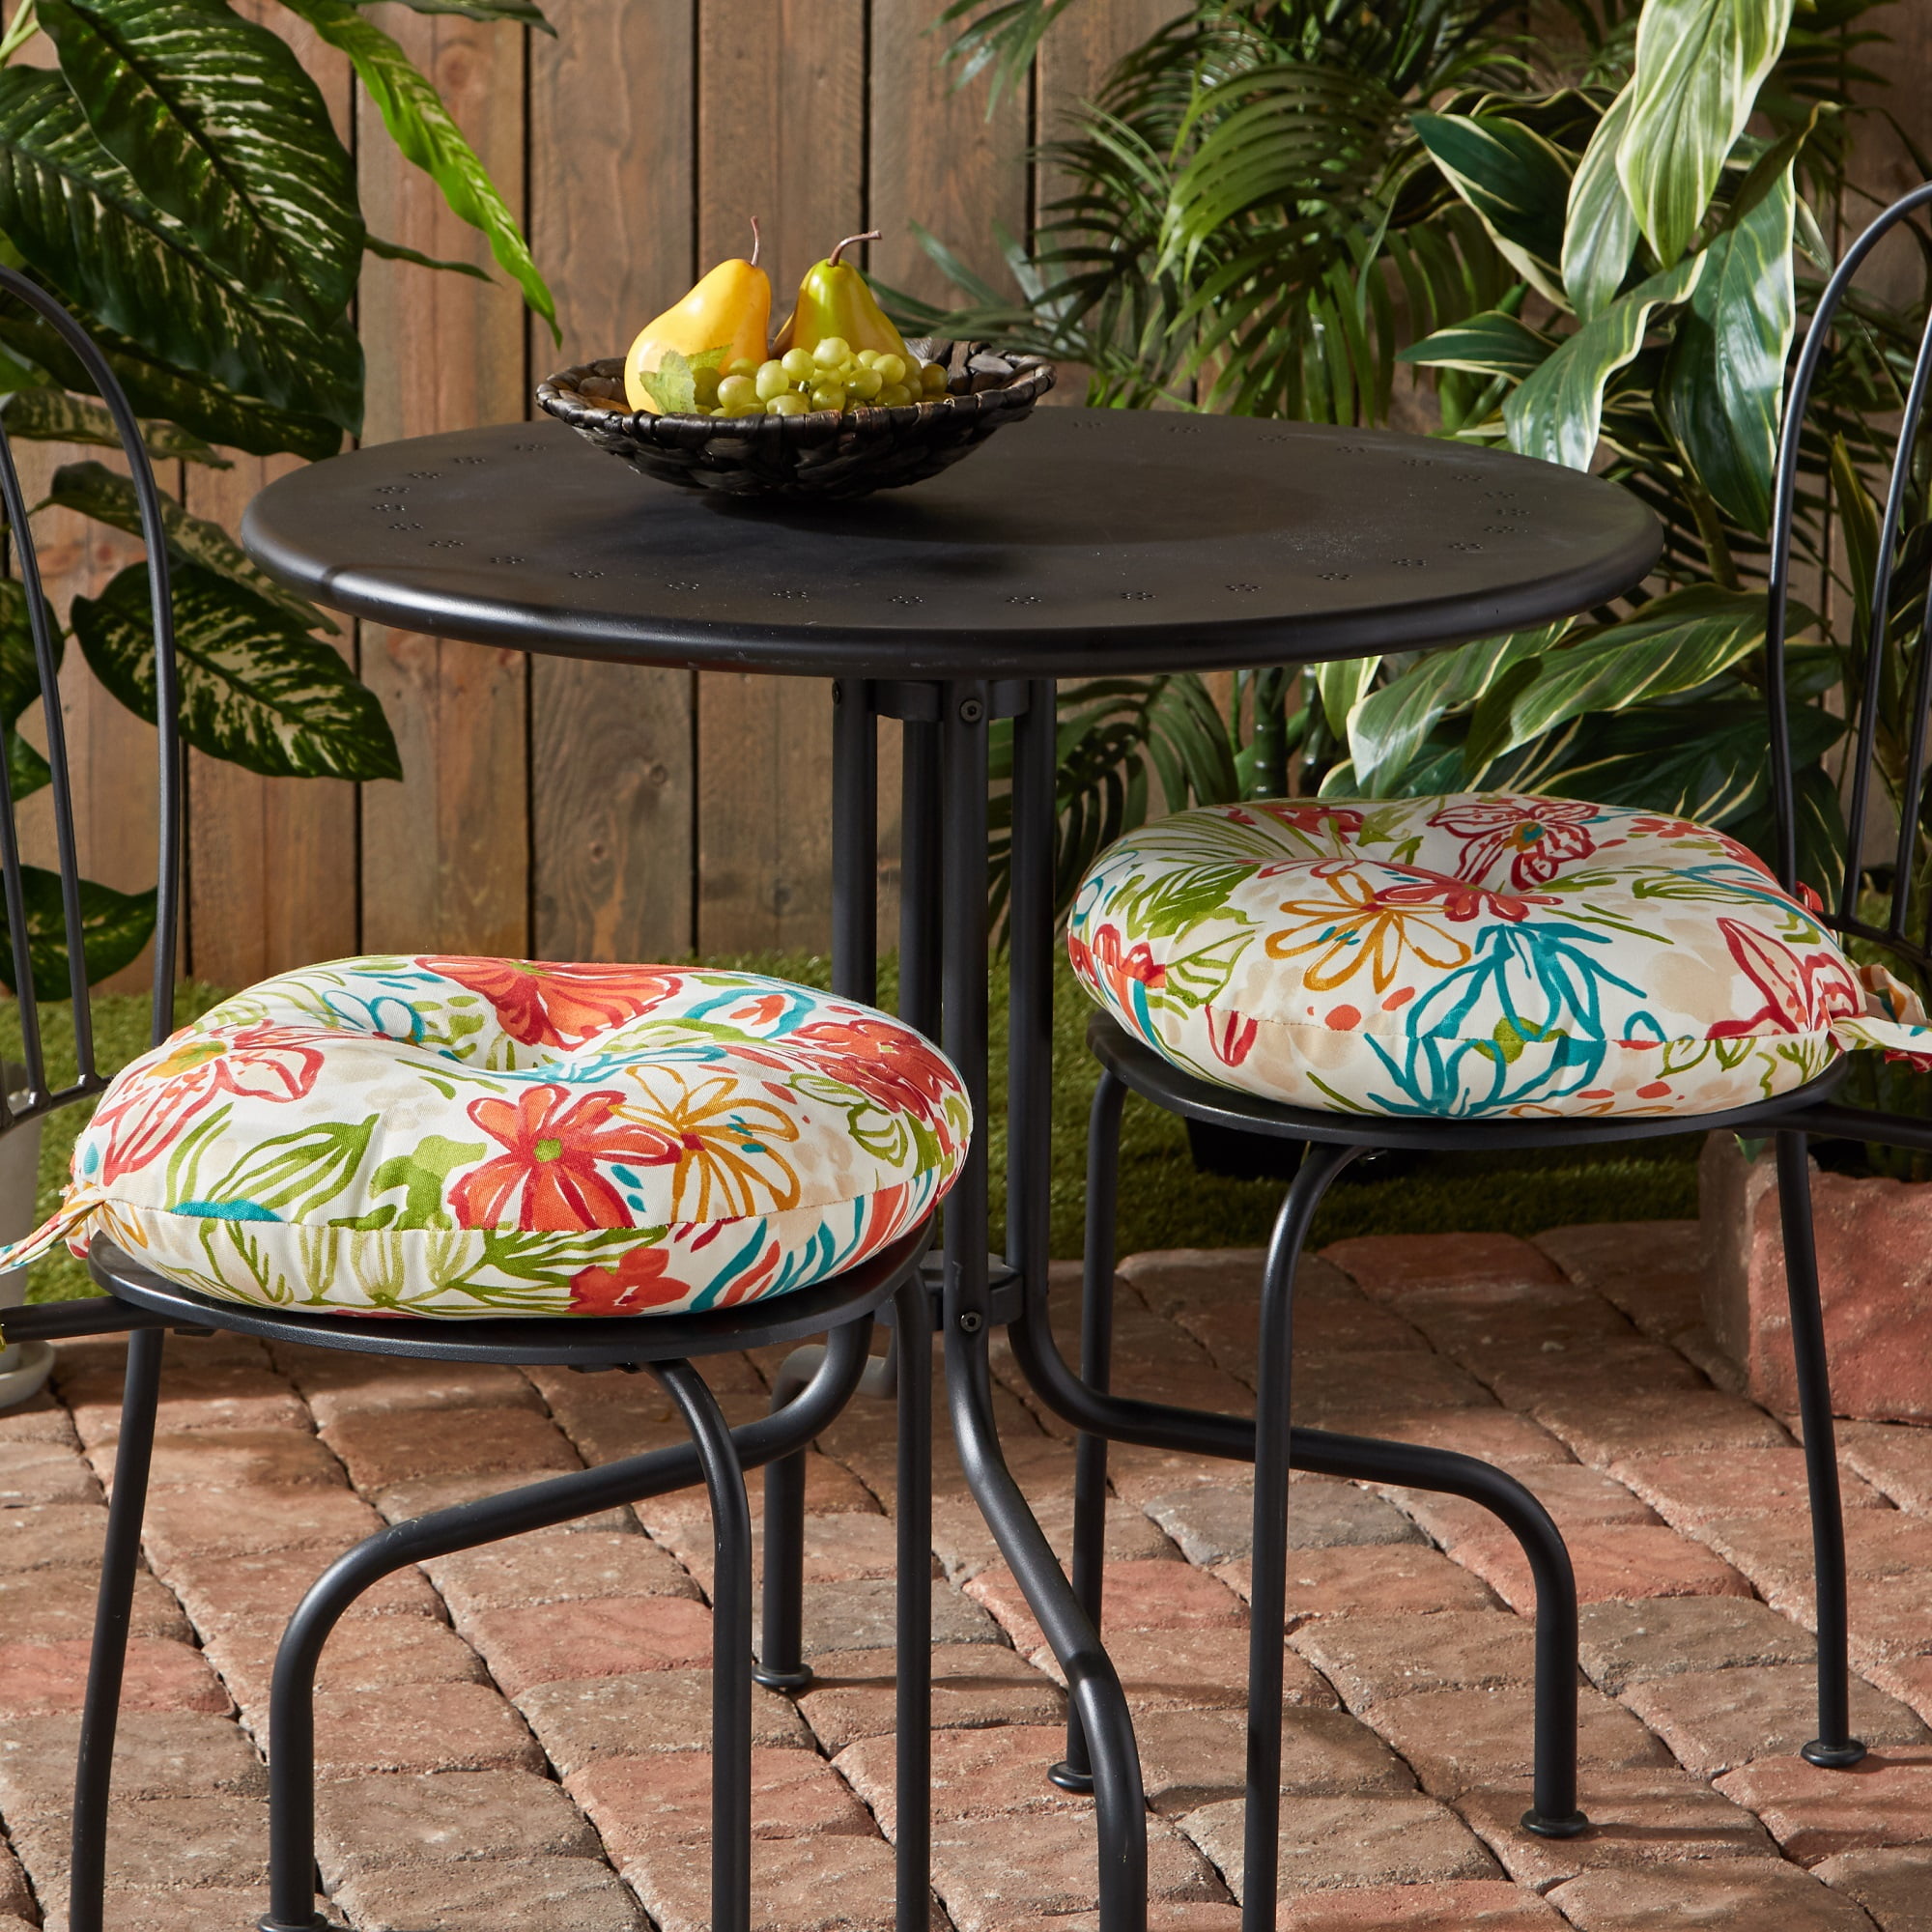 US Round Garden Chair Cushion Pad ONLY Outdoor Stool Patio Dining Seat Pad JR15 